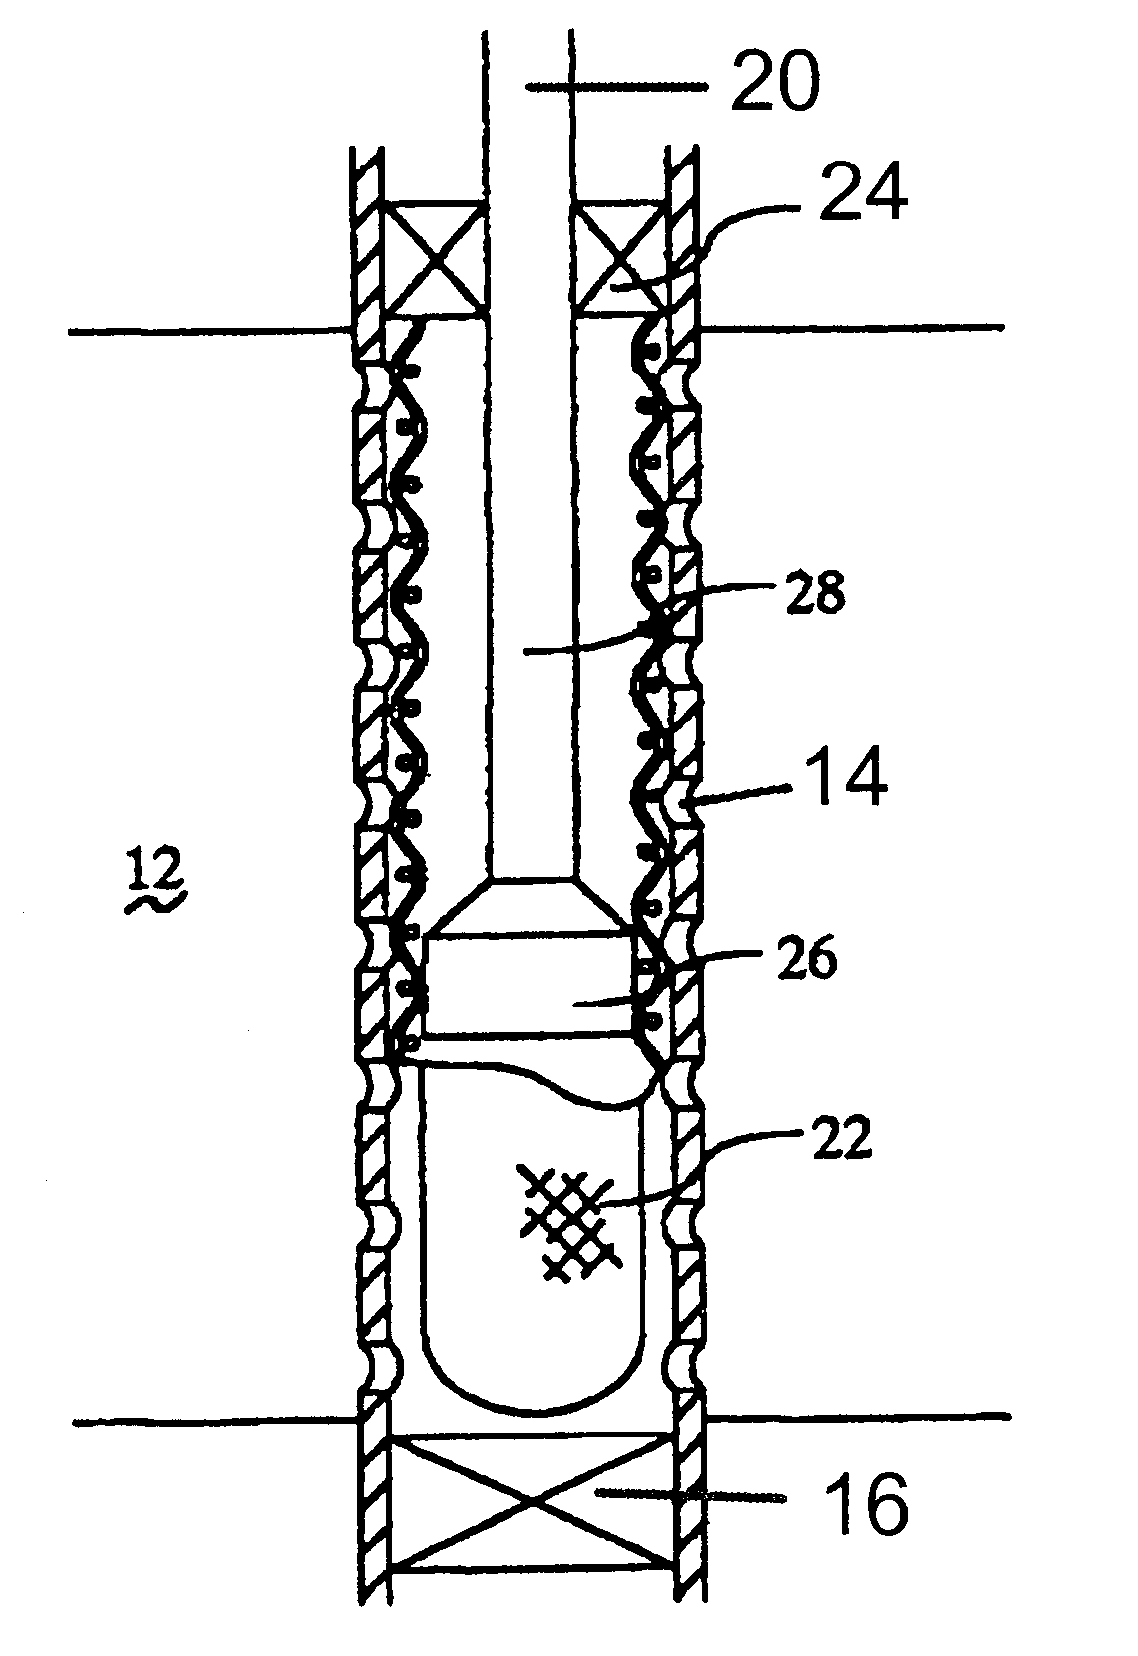 Method of controlling proppant flowback in a well